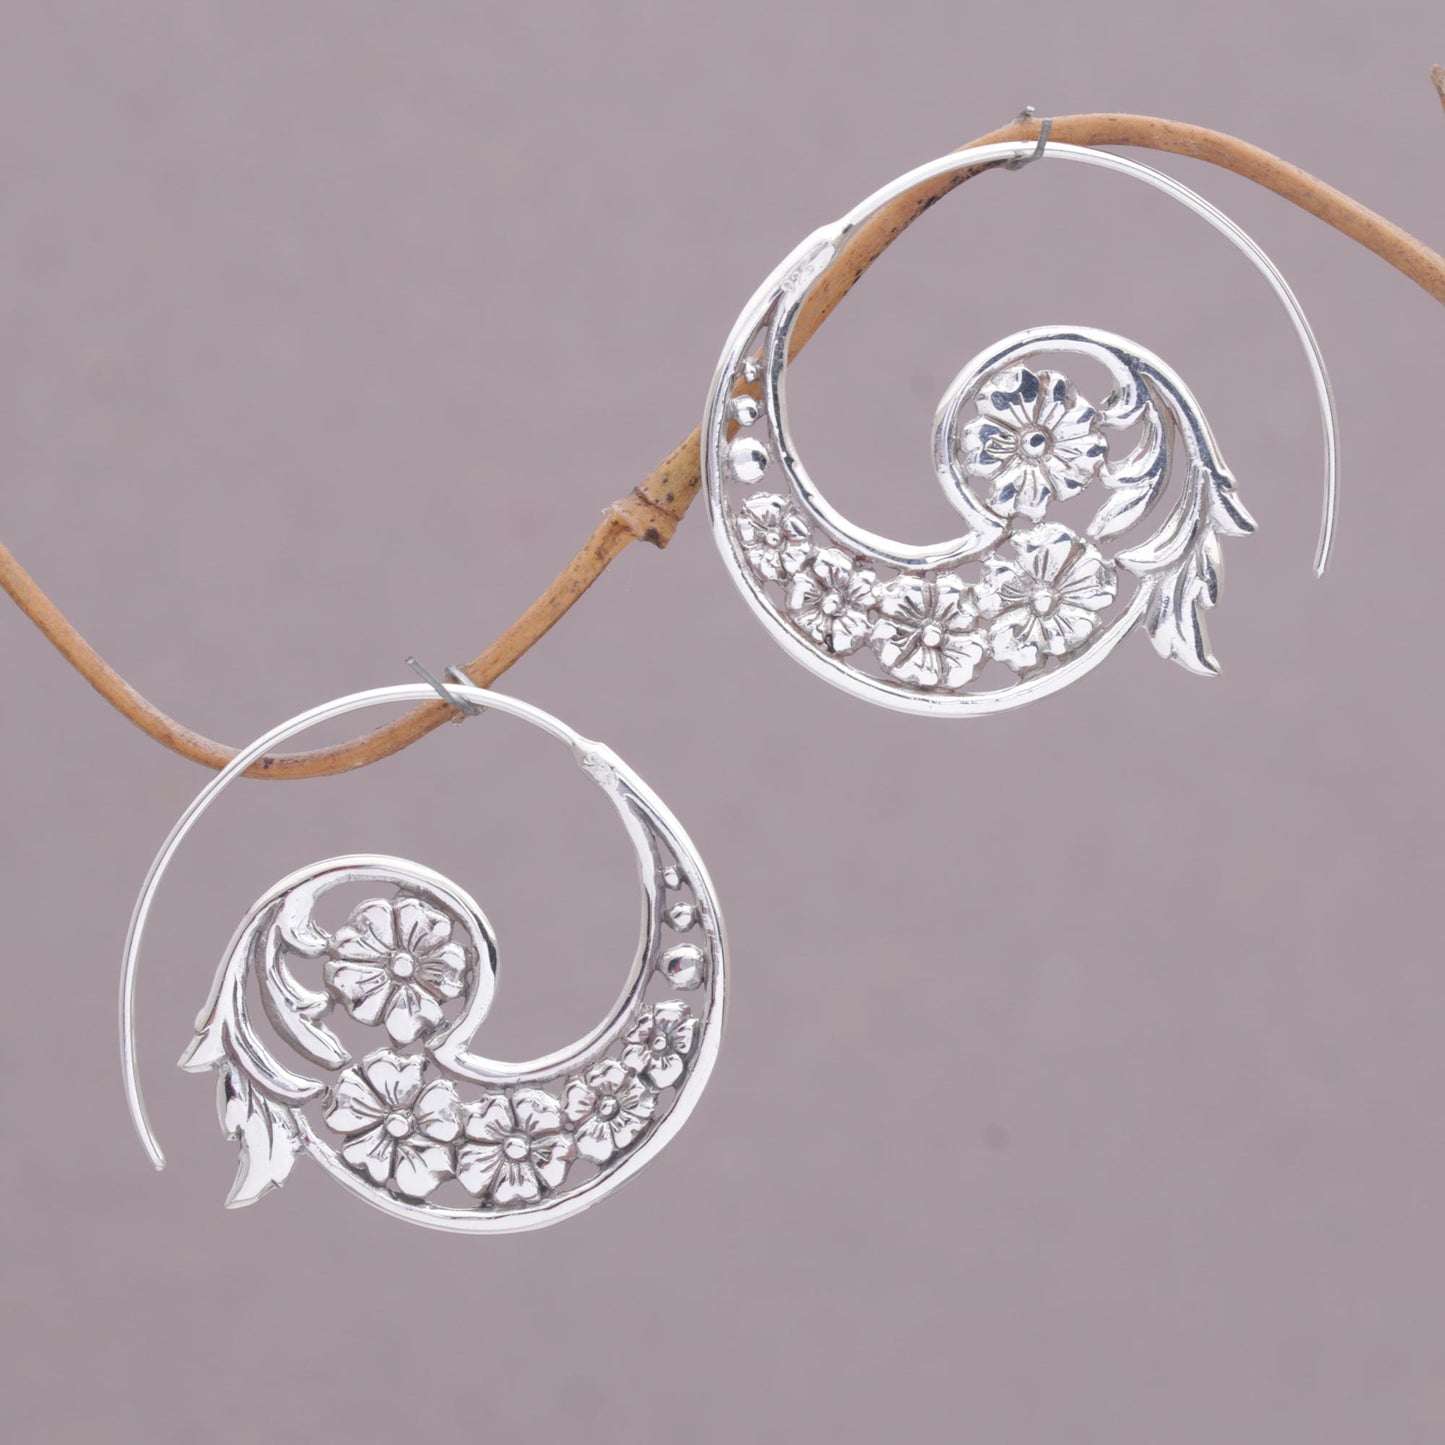 Dazzling Flourish Silver Floral Spiral Earrings